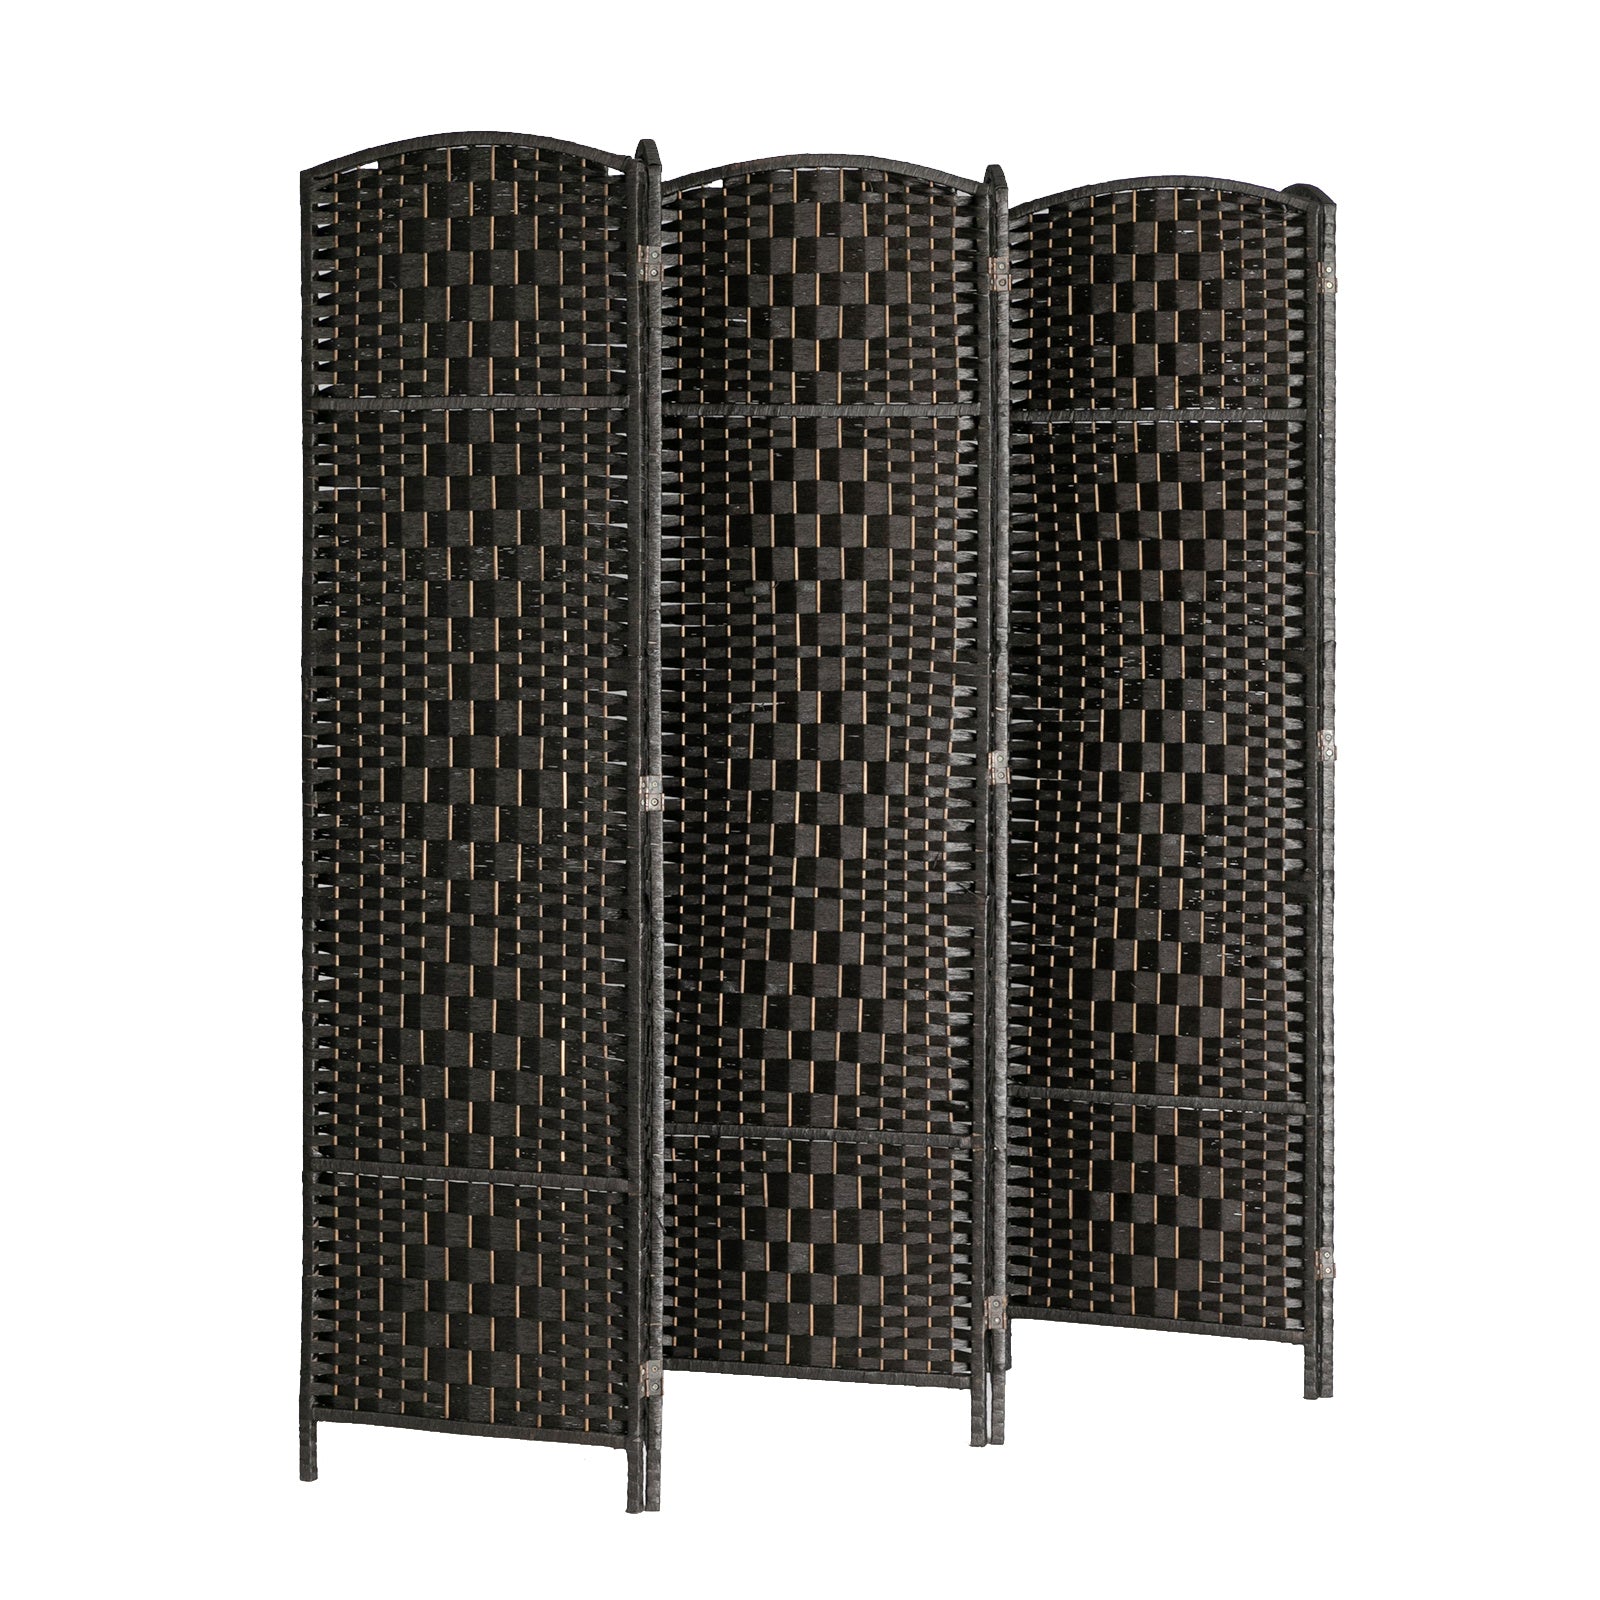 Room Divider, Weave Fiber Extra Wide Room Divider, Double Hinged,6 Panel Room Divider & Folding Privacy Screens, Freestanding Room Dividers RT